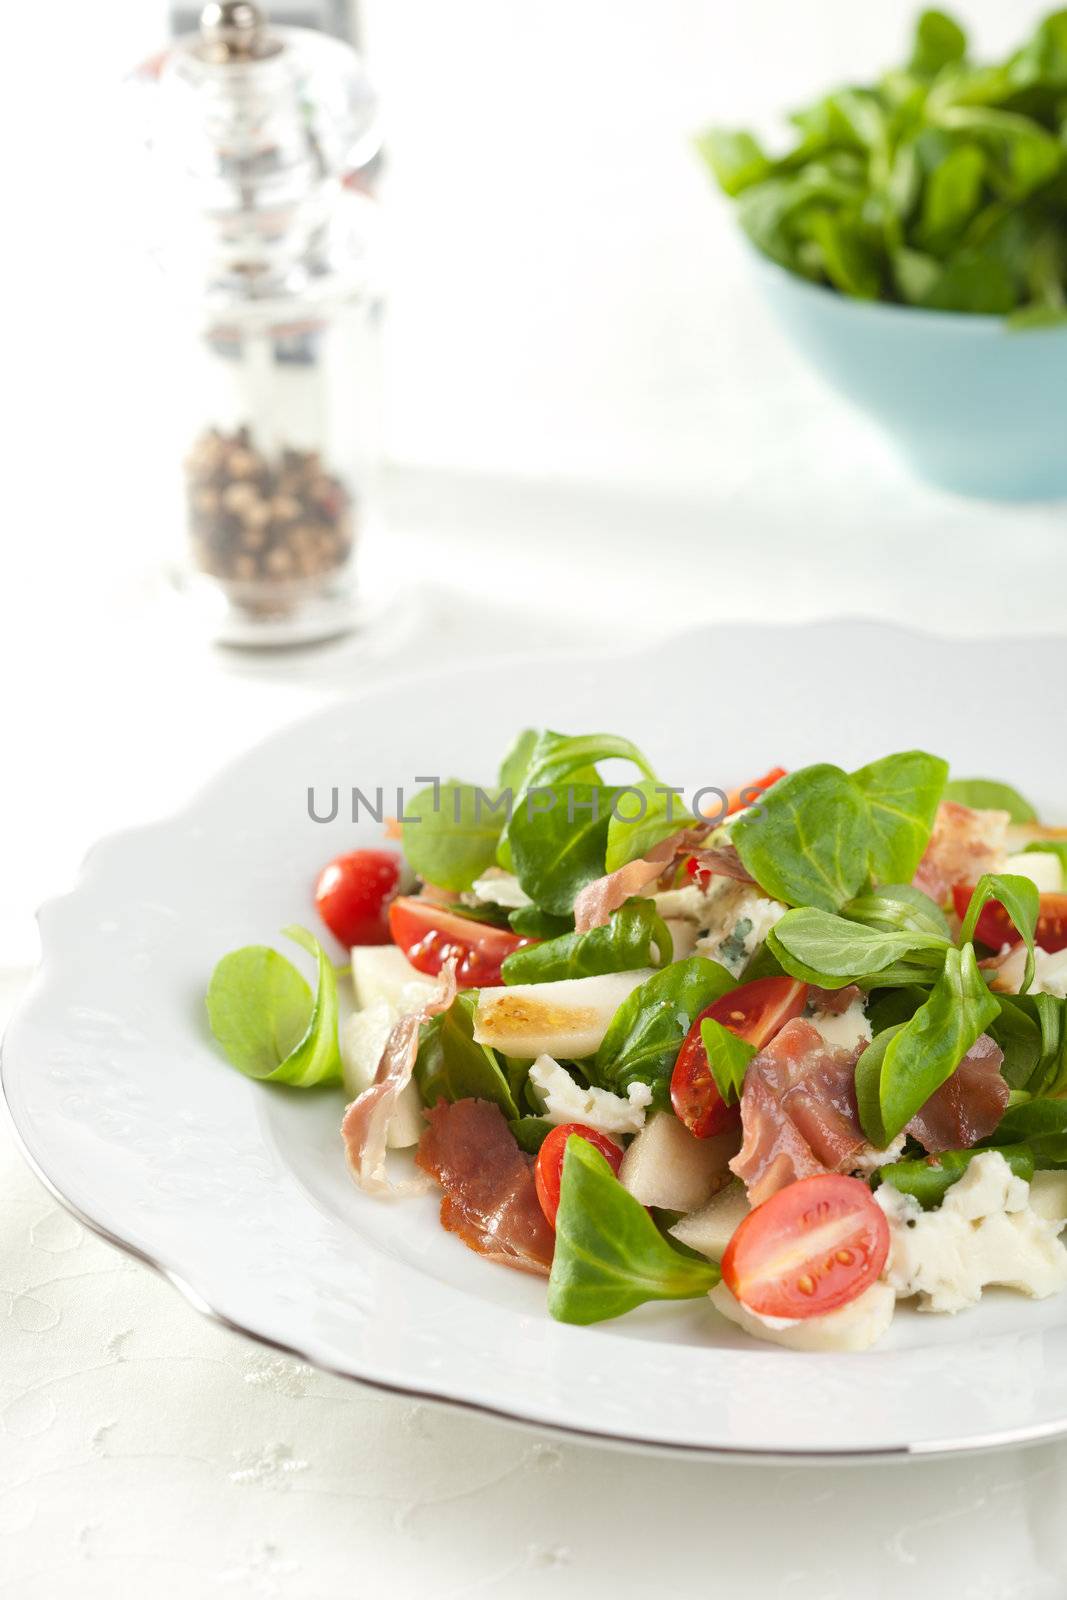 Delicious salad with fresh greens, tomatoes, roquefort and pear